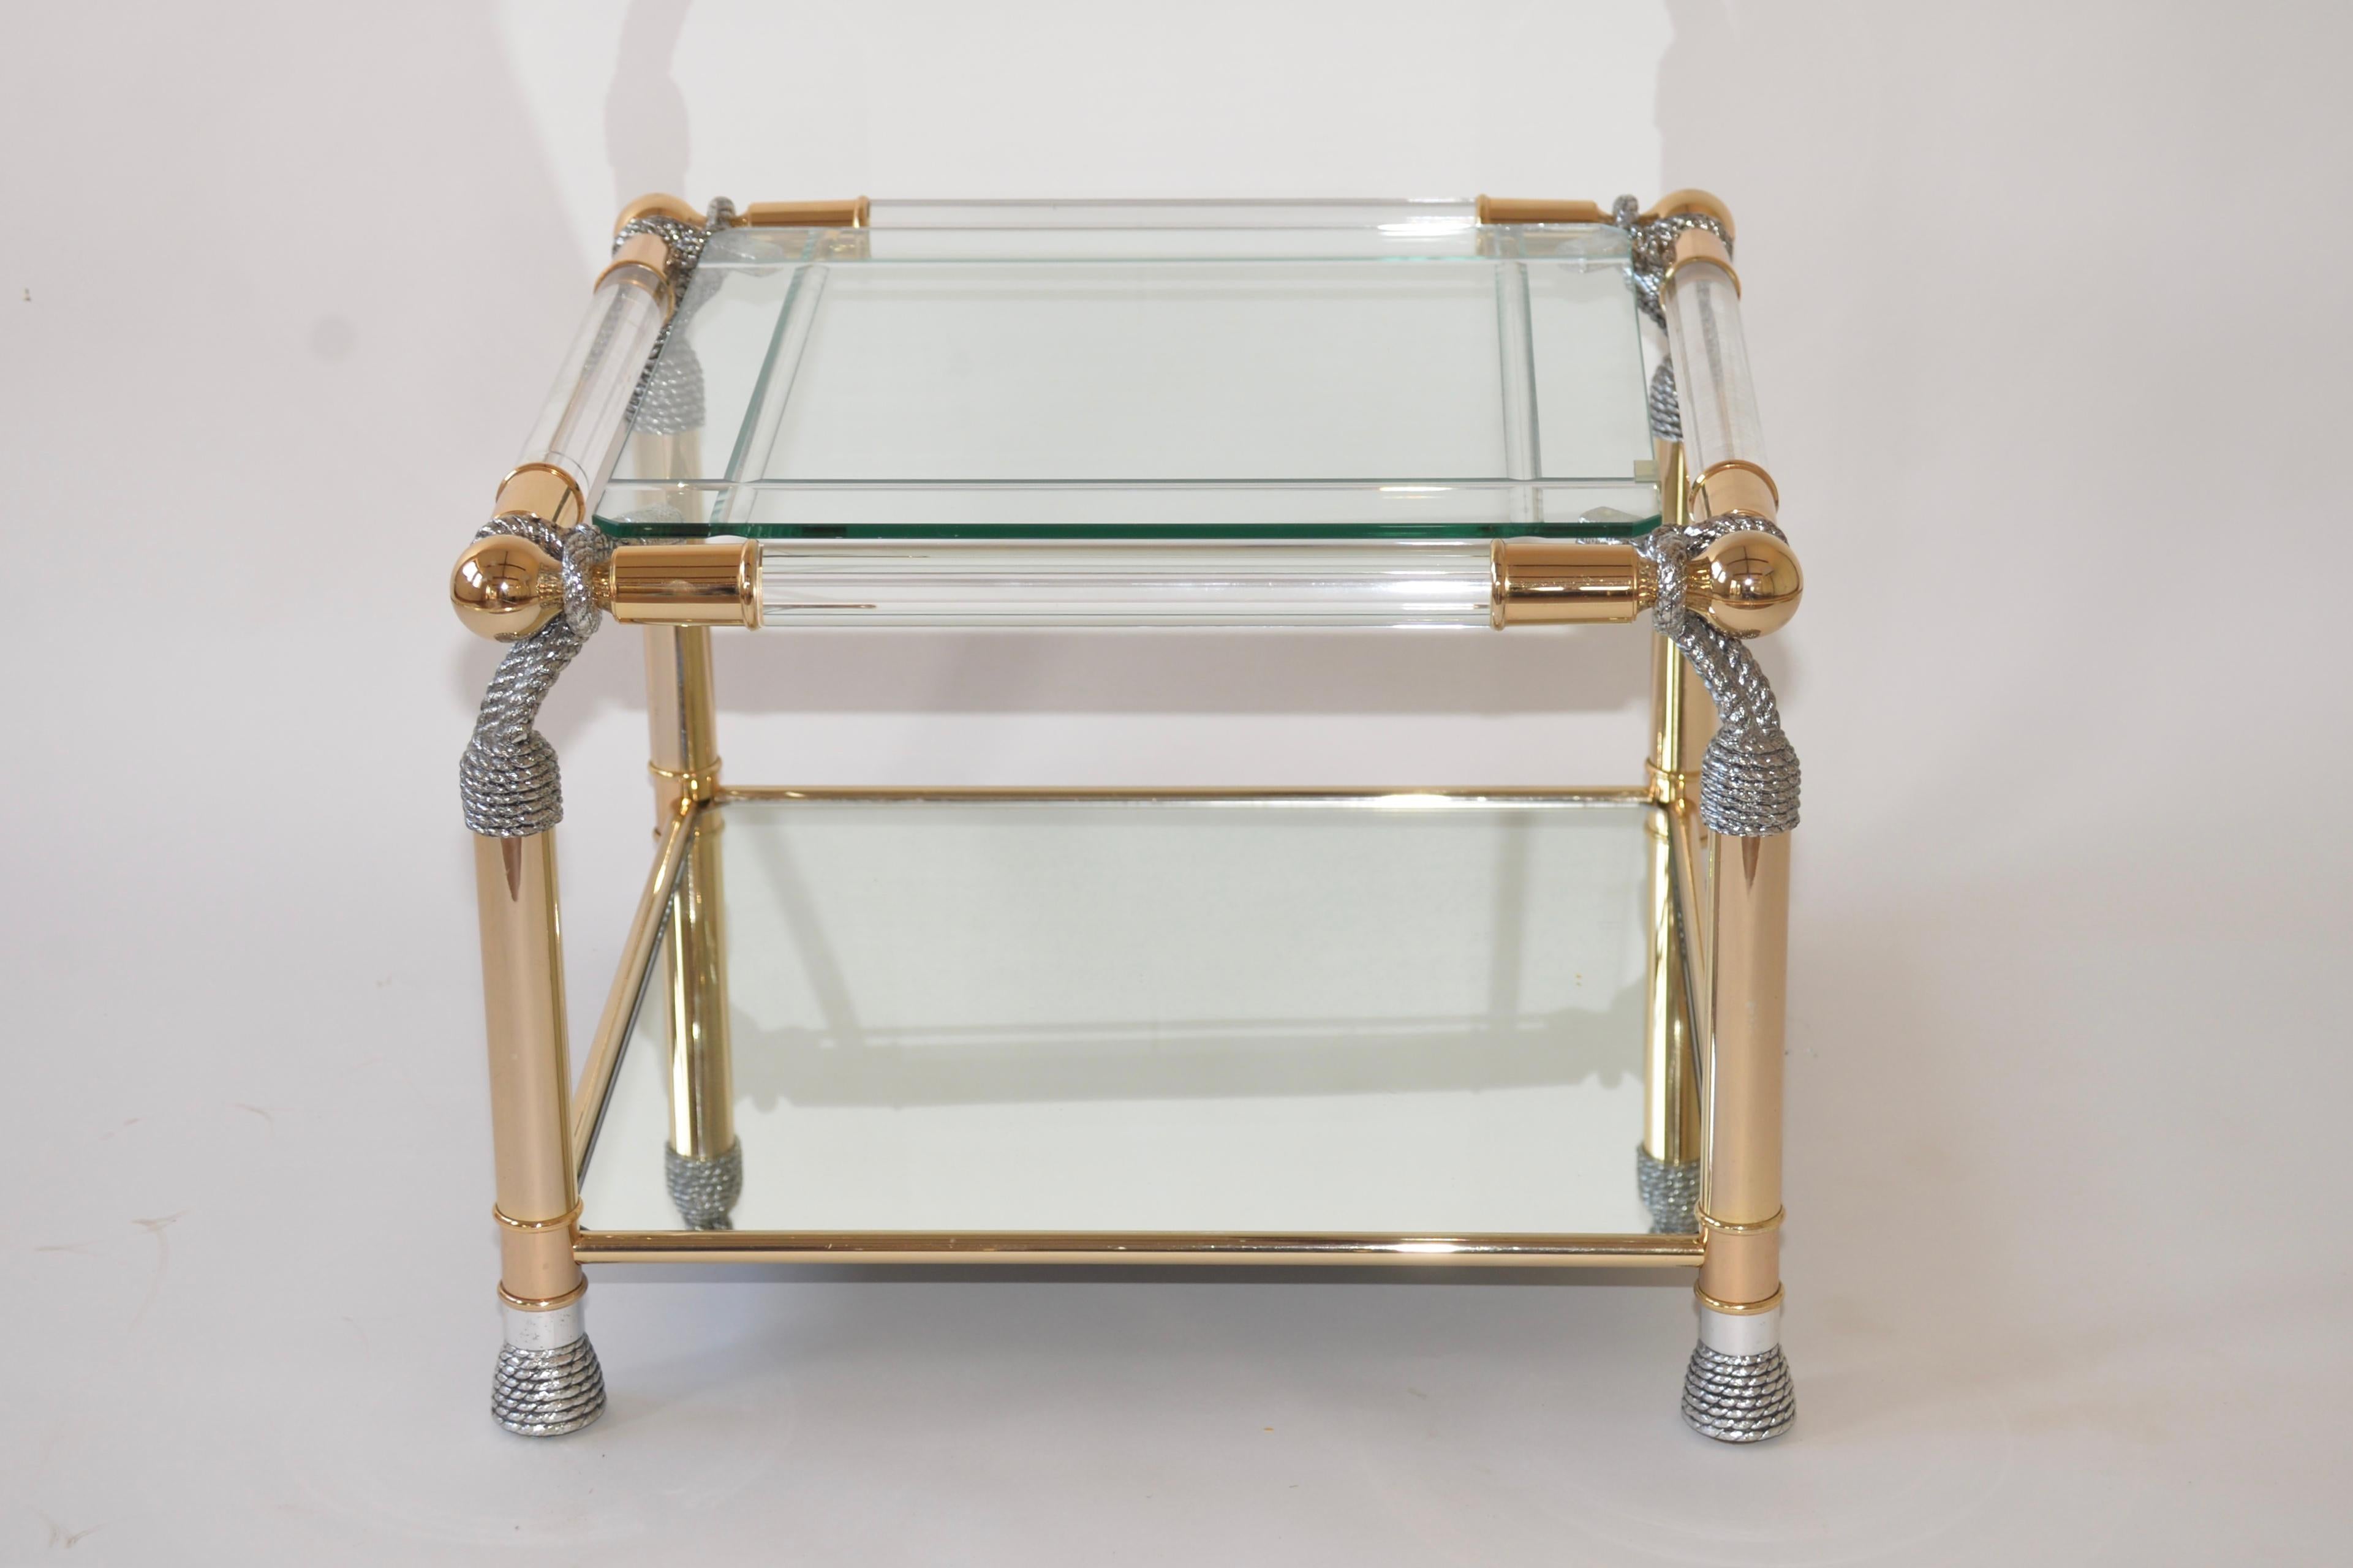 Fabulous Lucite, polished brass and glass Hollywood Regency style coffee table. The top shelf is beveled glass and the shelf below is mirrored glass. Each corner has a twisted rope effect to make this a very striking item.